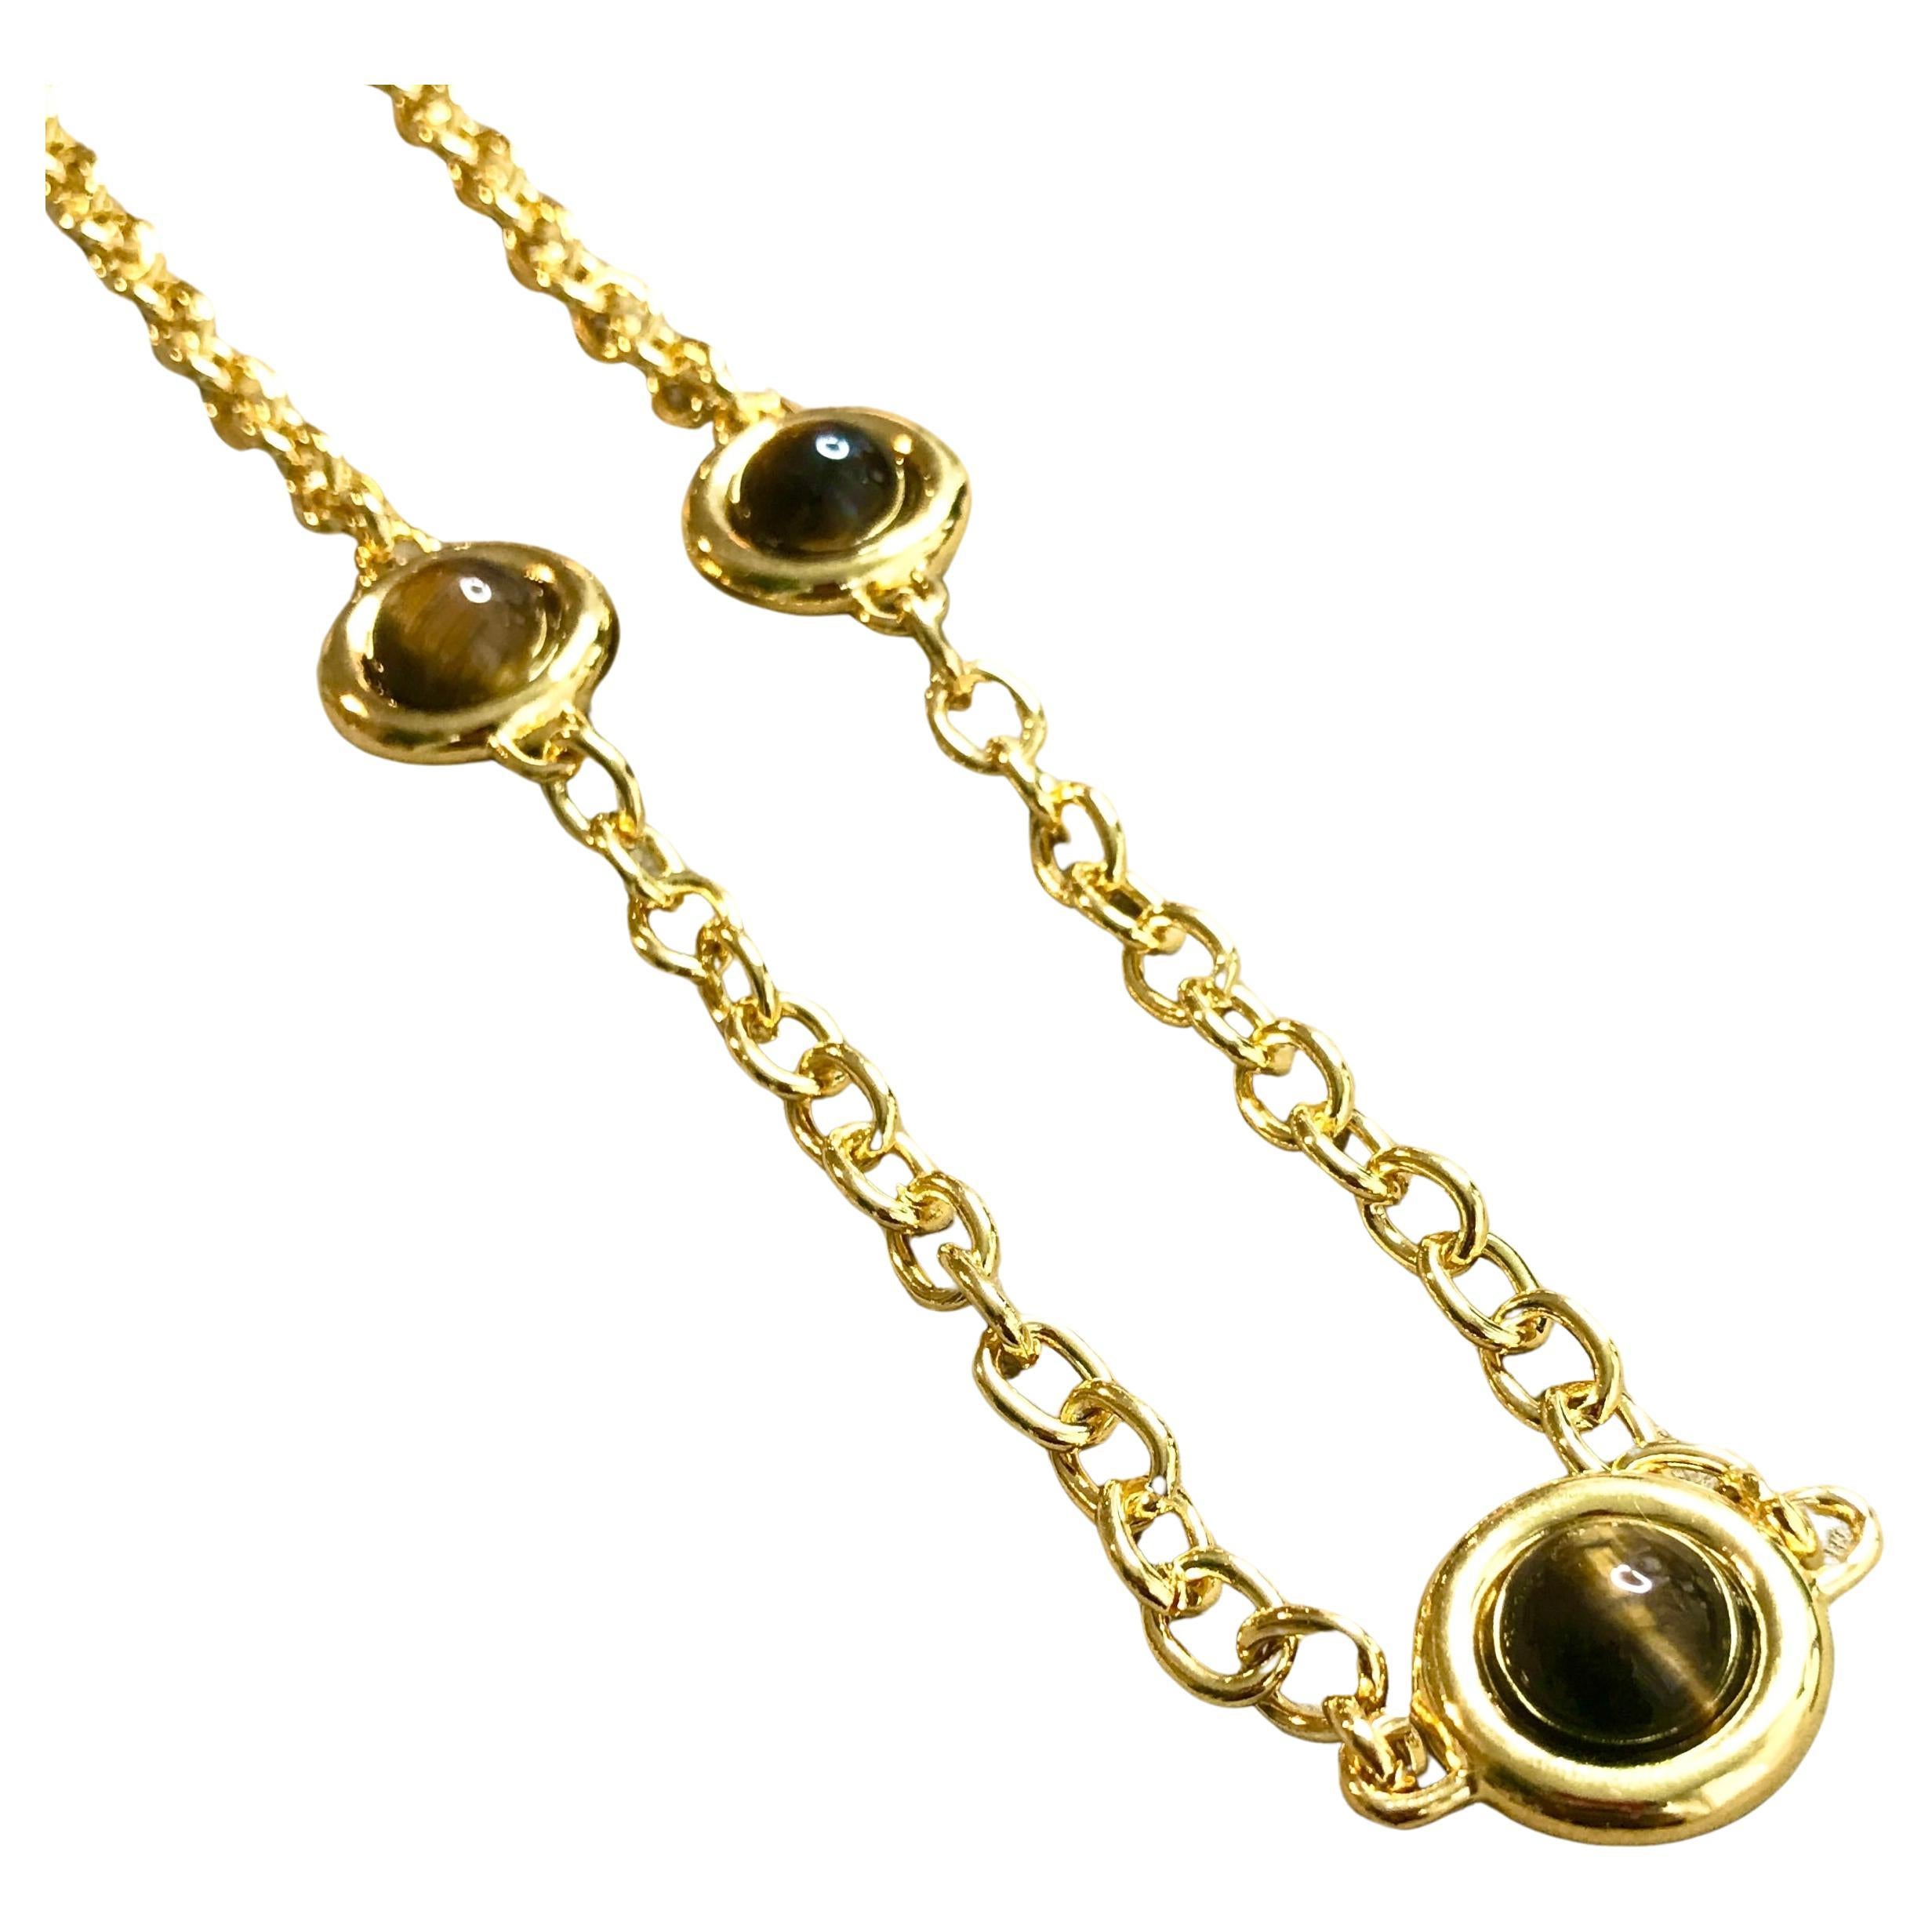 Tiger's Eye set 'Aragon' long chain necklace For Sale